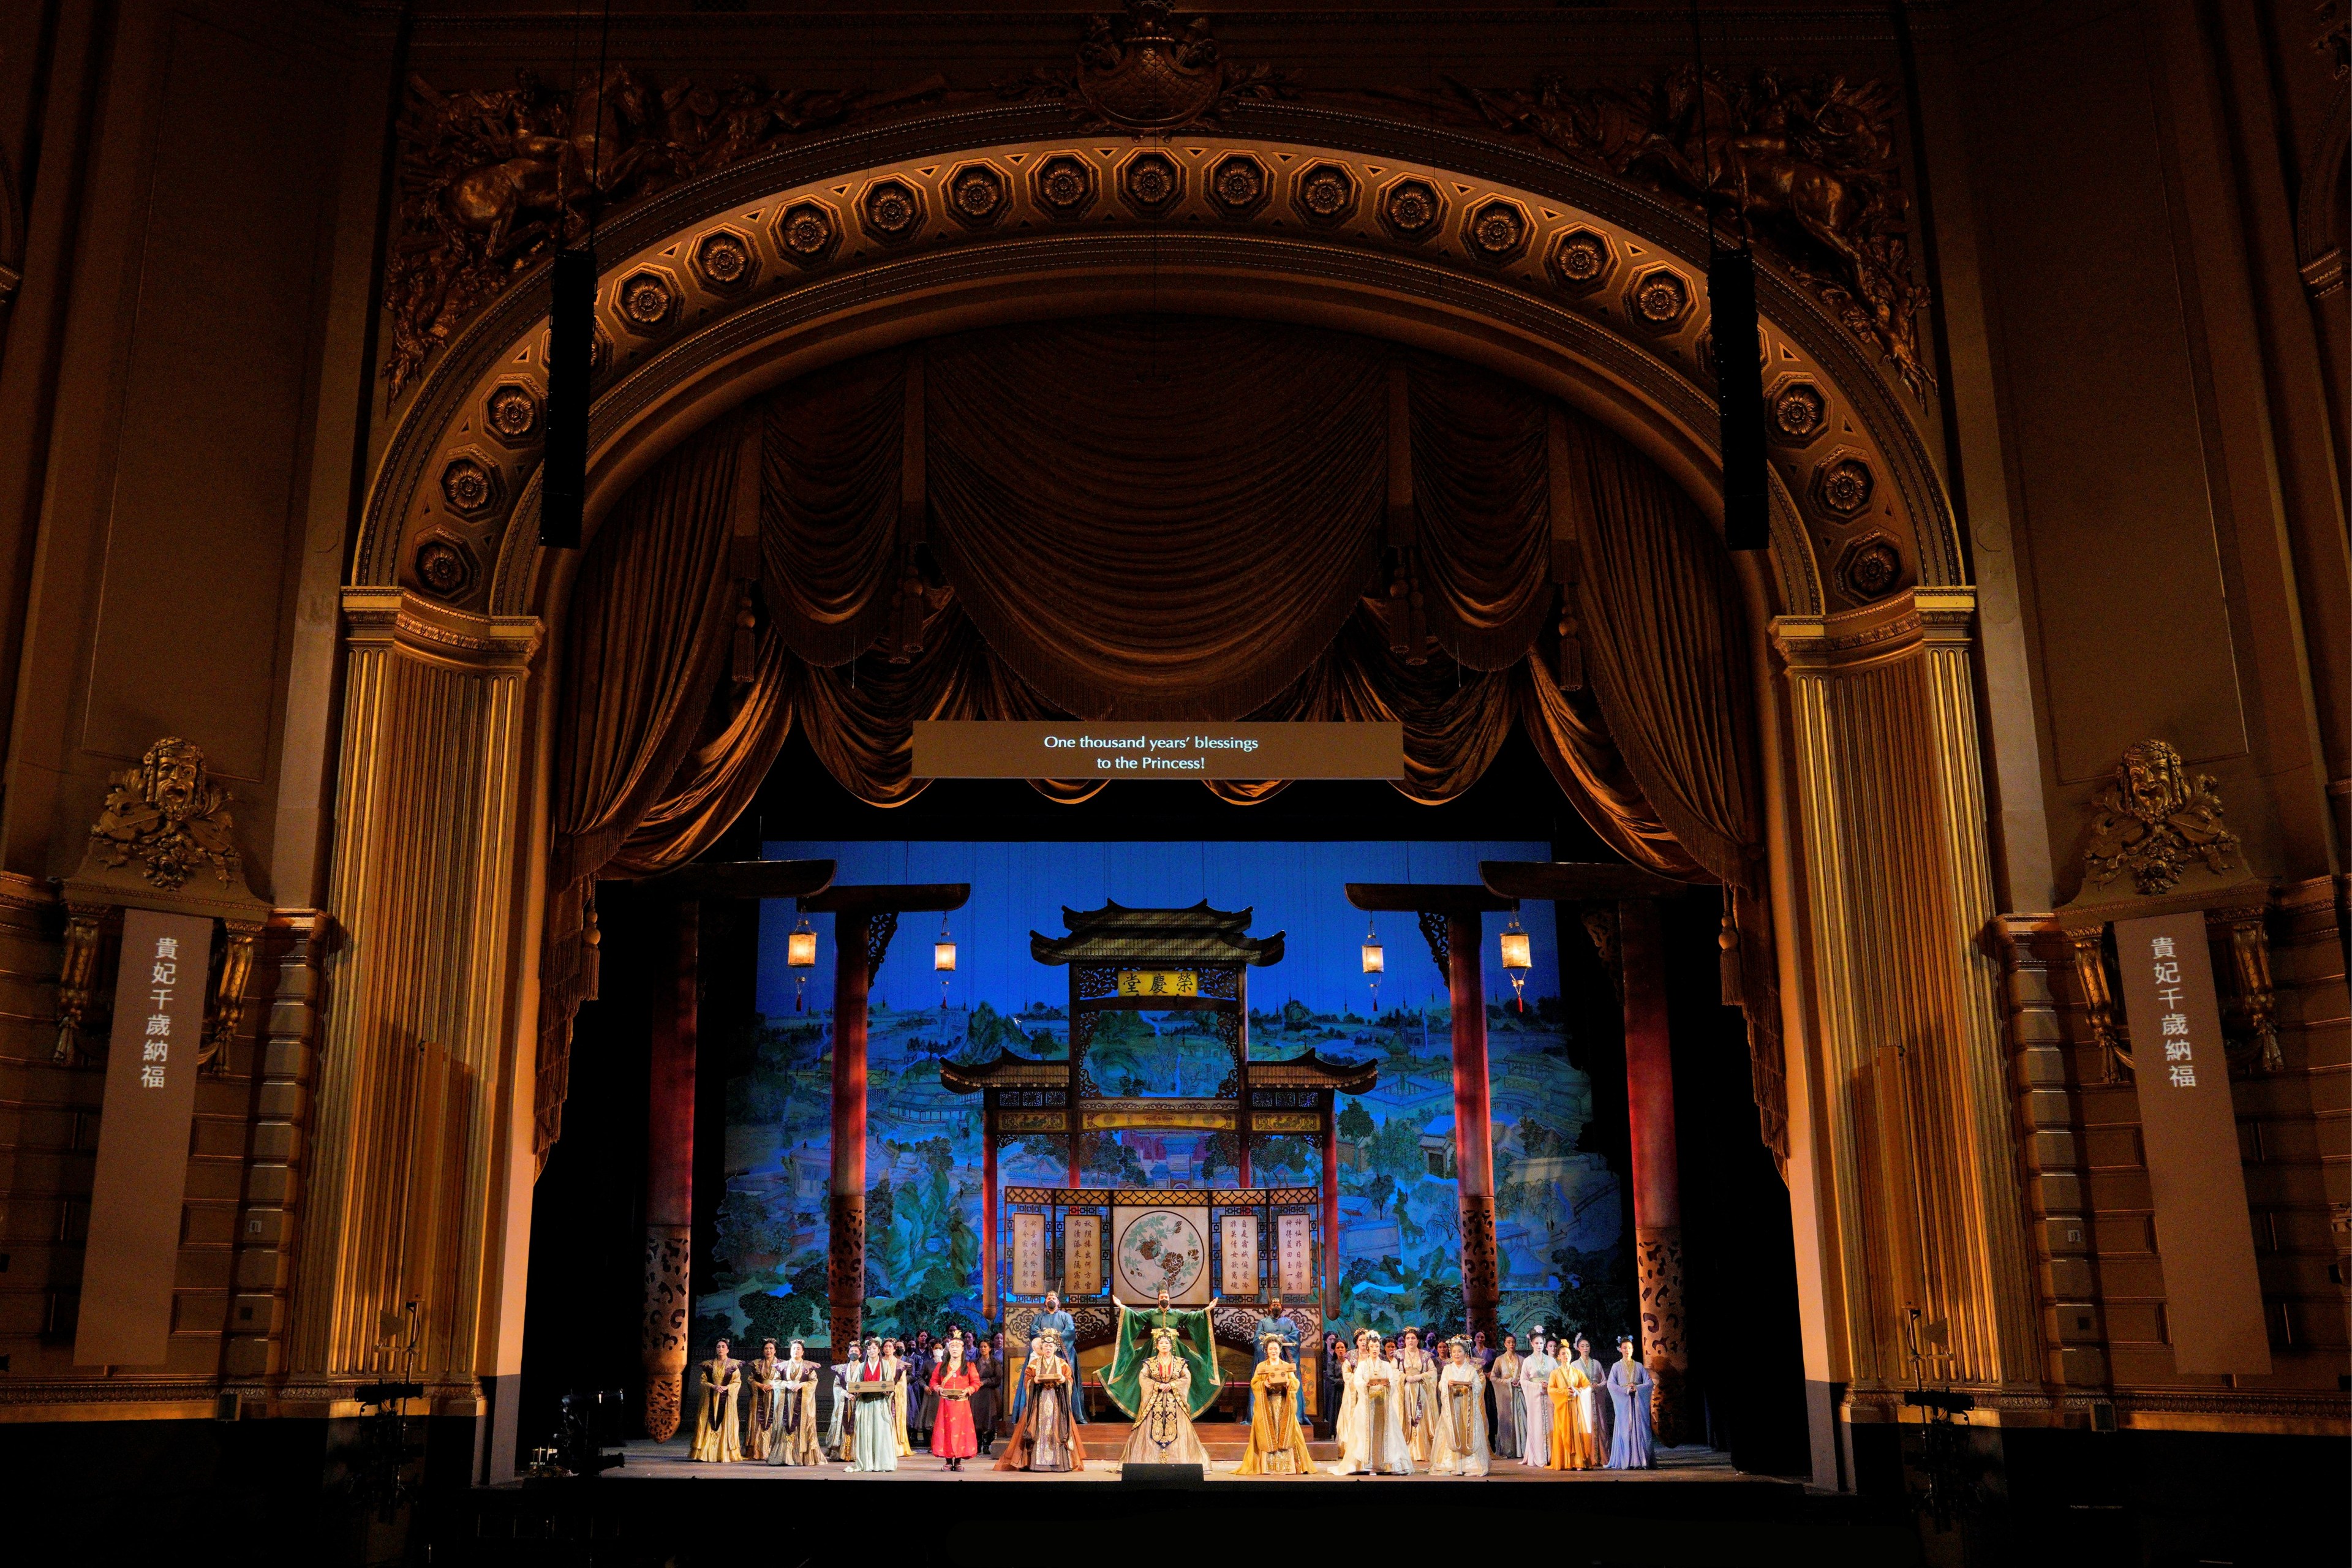 A stage performance with elaborate costumes set in a grand theater. The backdrop features a traditional Asian scene, and the theater has an opulent arch and drapes.